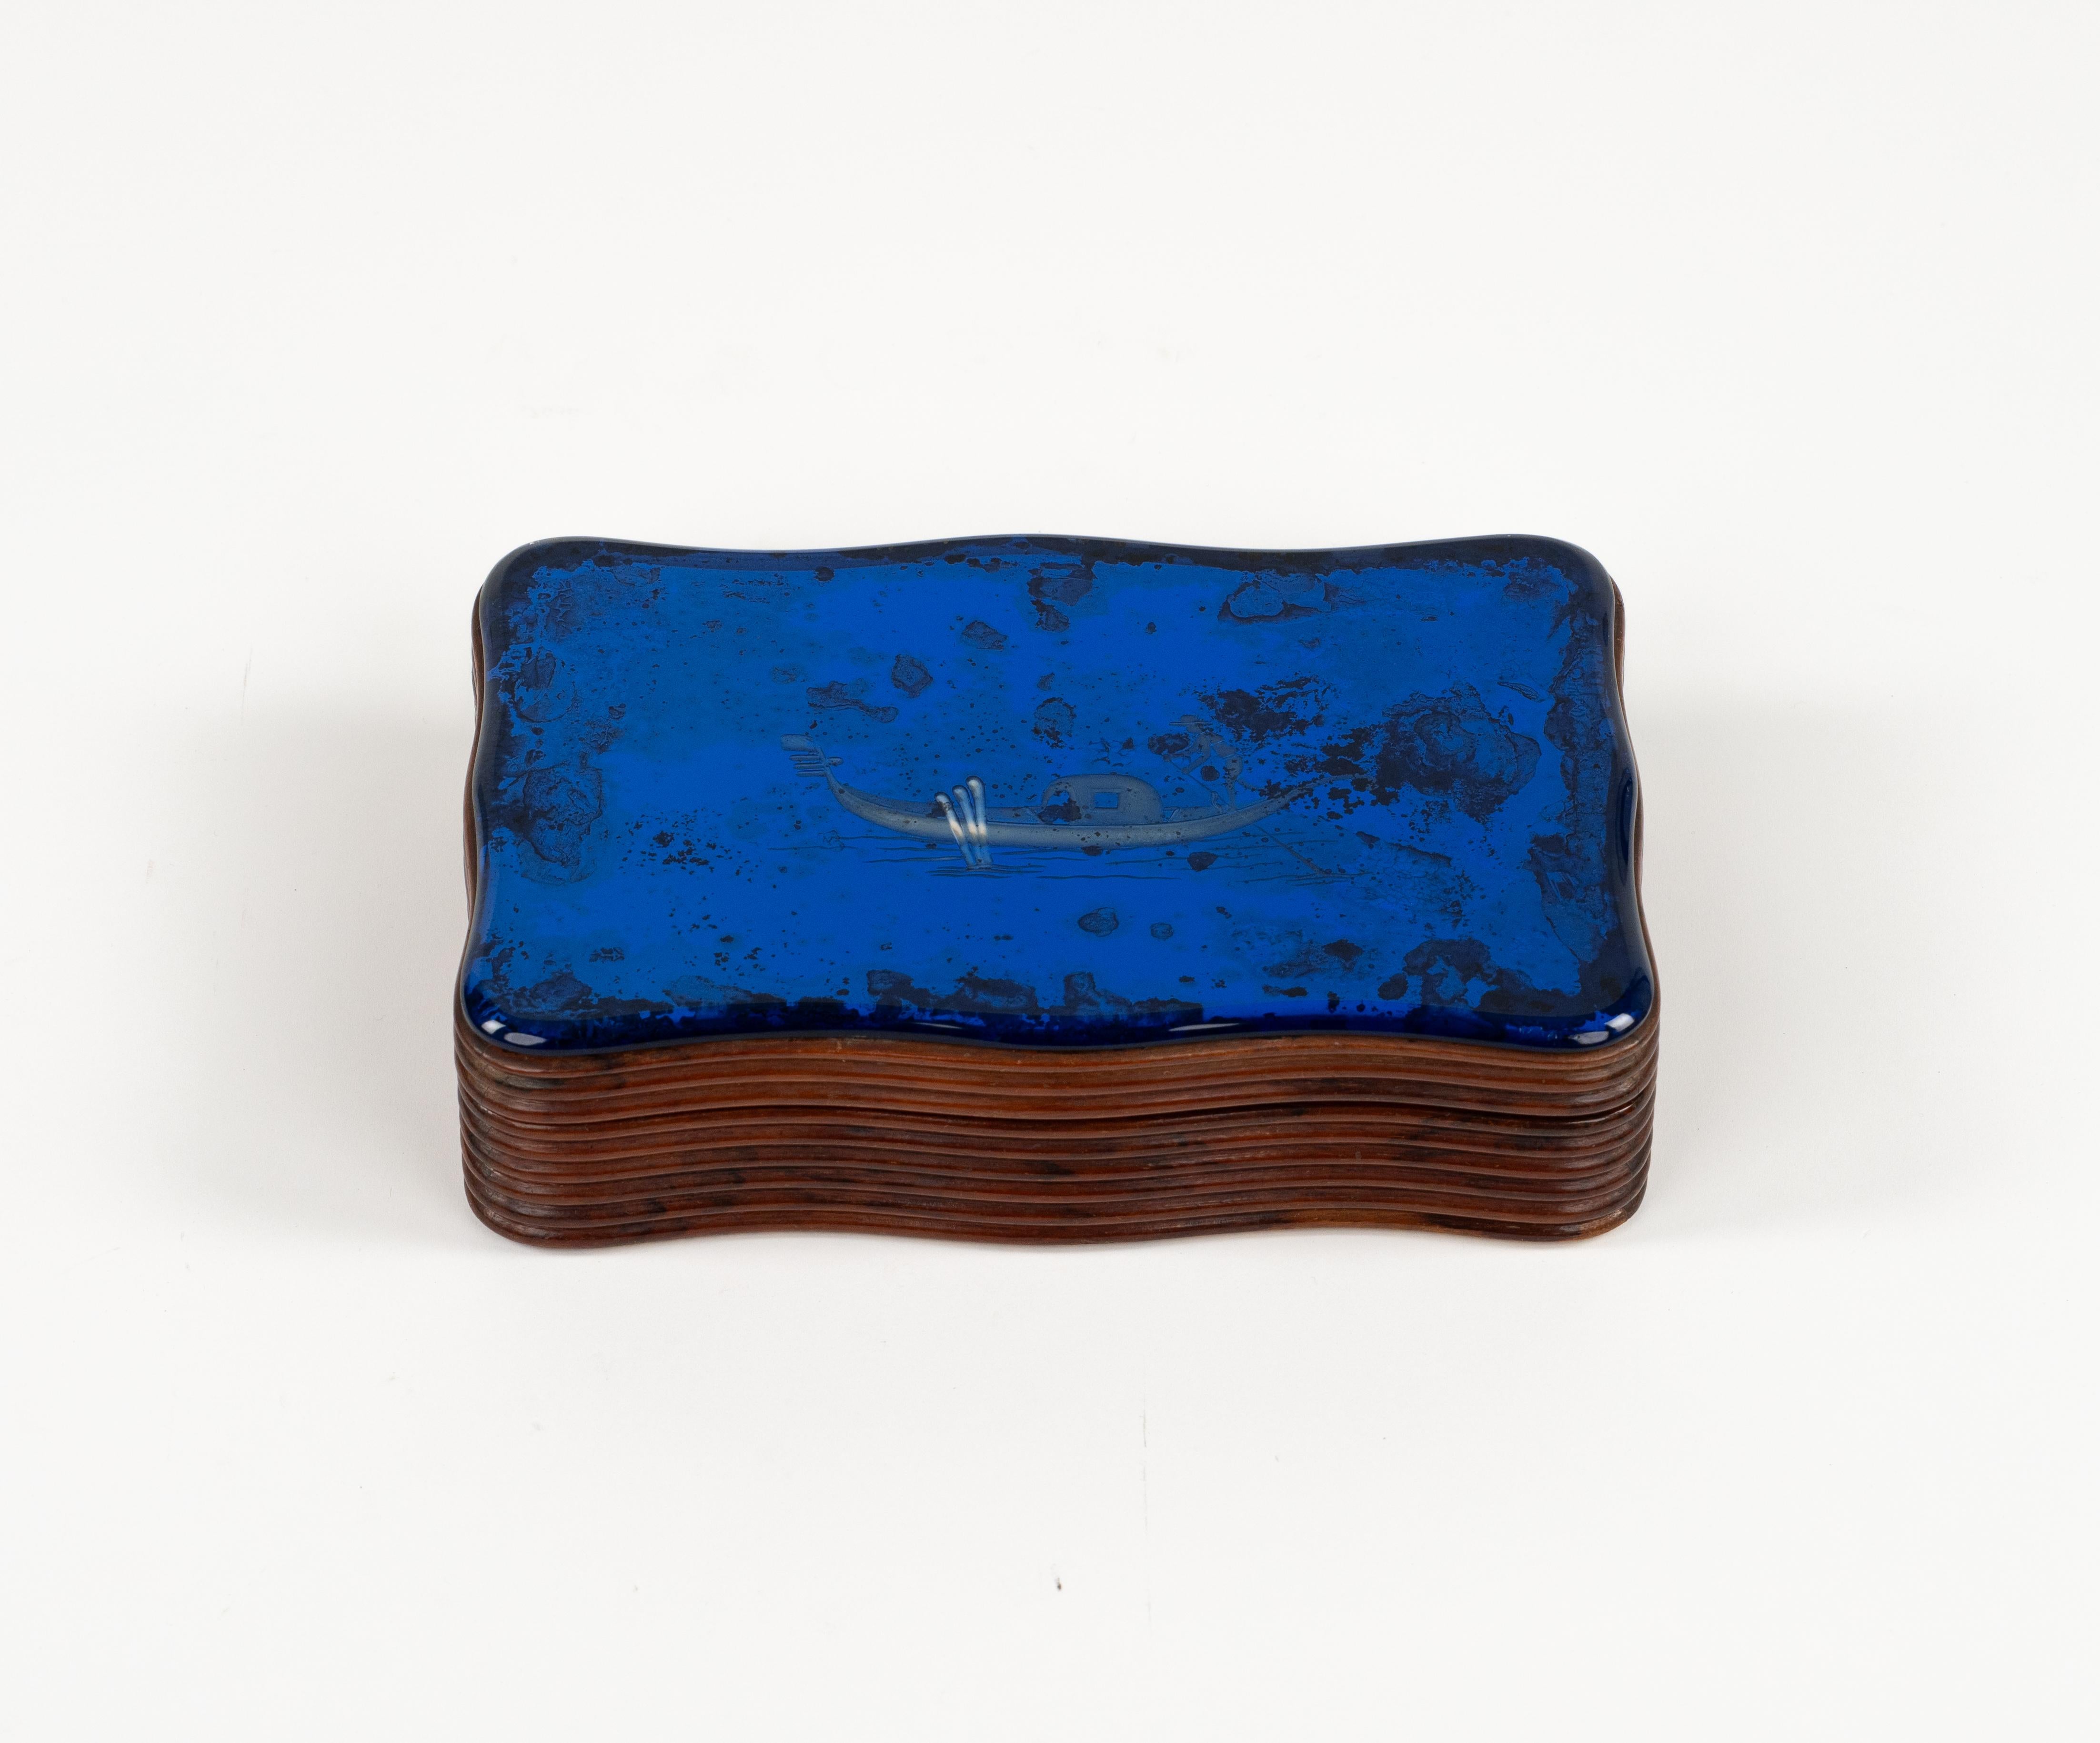 Amazing undulated rectangular Box in wood and mirrored blue crystal engraving of a venetian gondola engraving  attributed to Pietro Chiesa and Gio Ponti for Fontana Arte.

Made in Italy in the 1930s.

A real collector’s item to enjoy and at the same